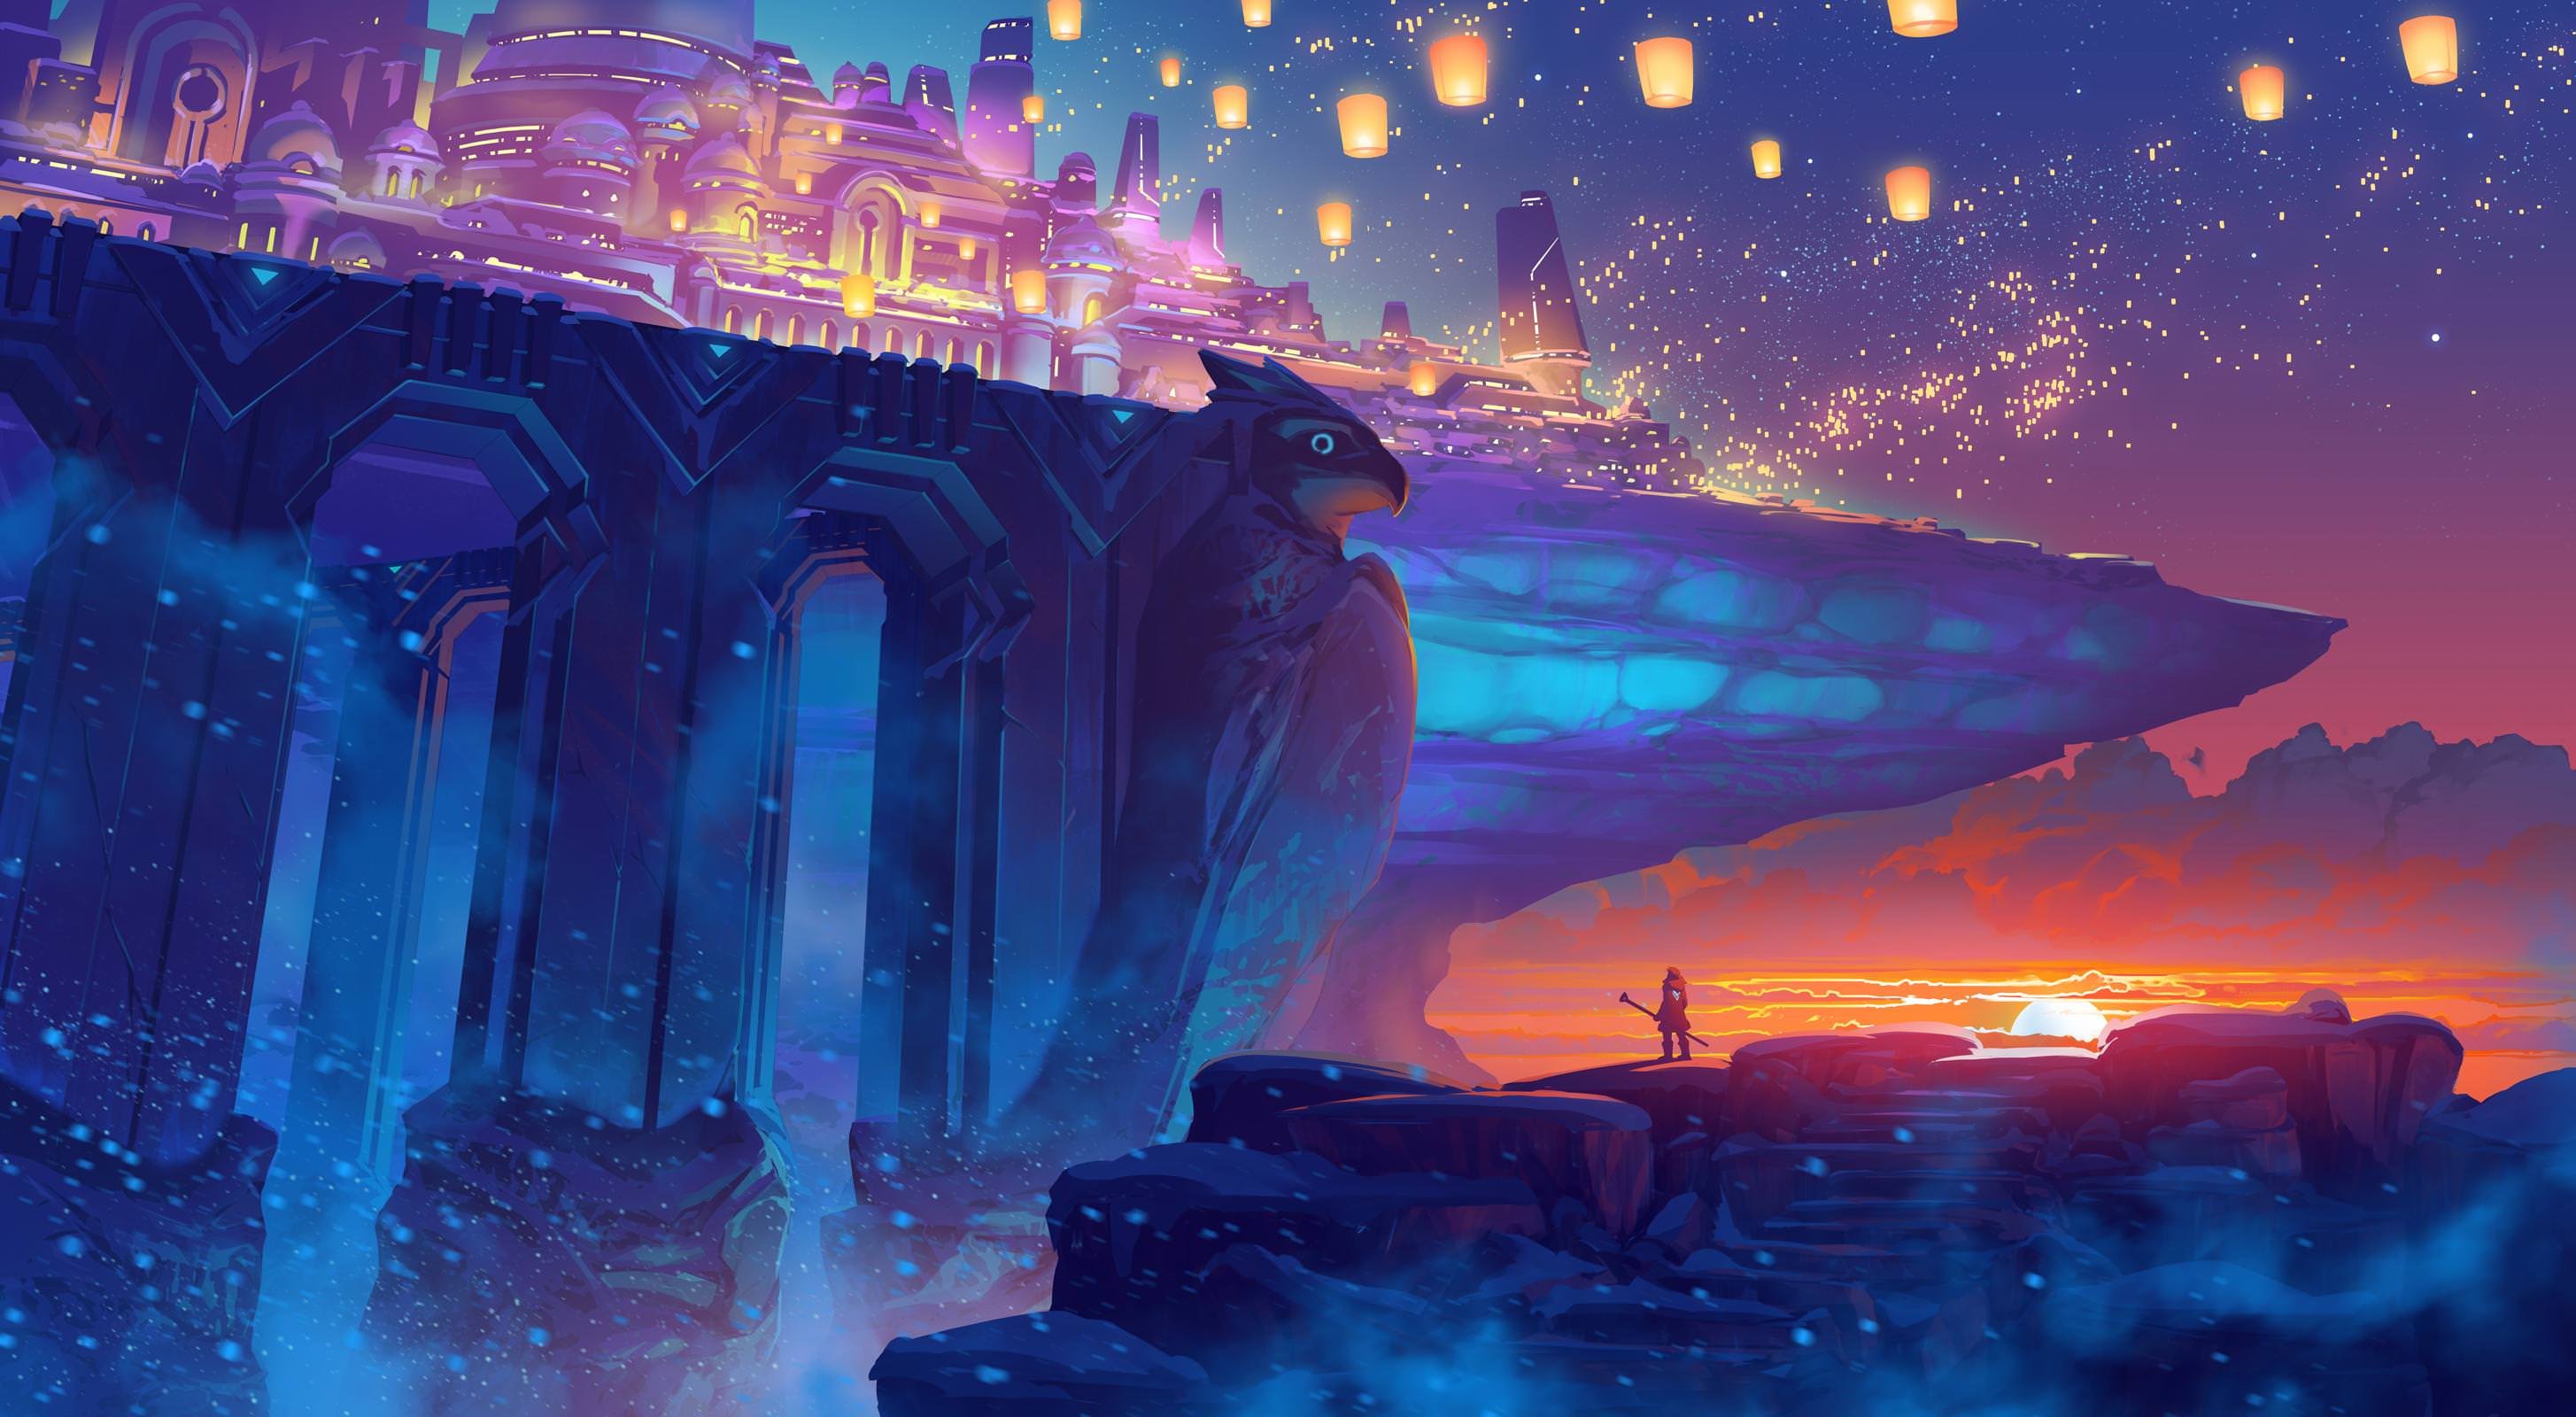 Duelyst 4K wallpapers for your desktop or mobile screen free and easy